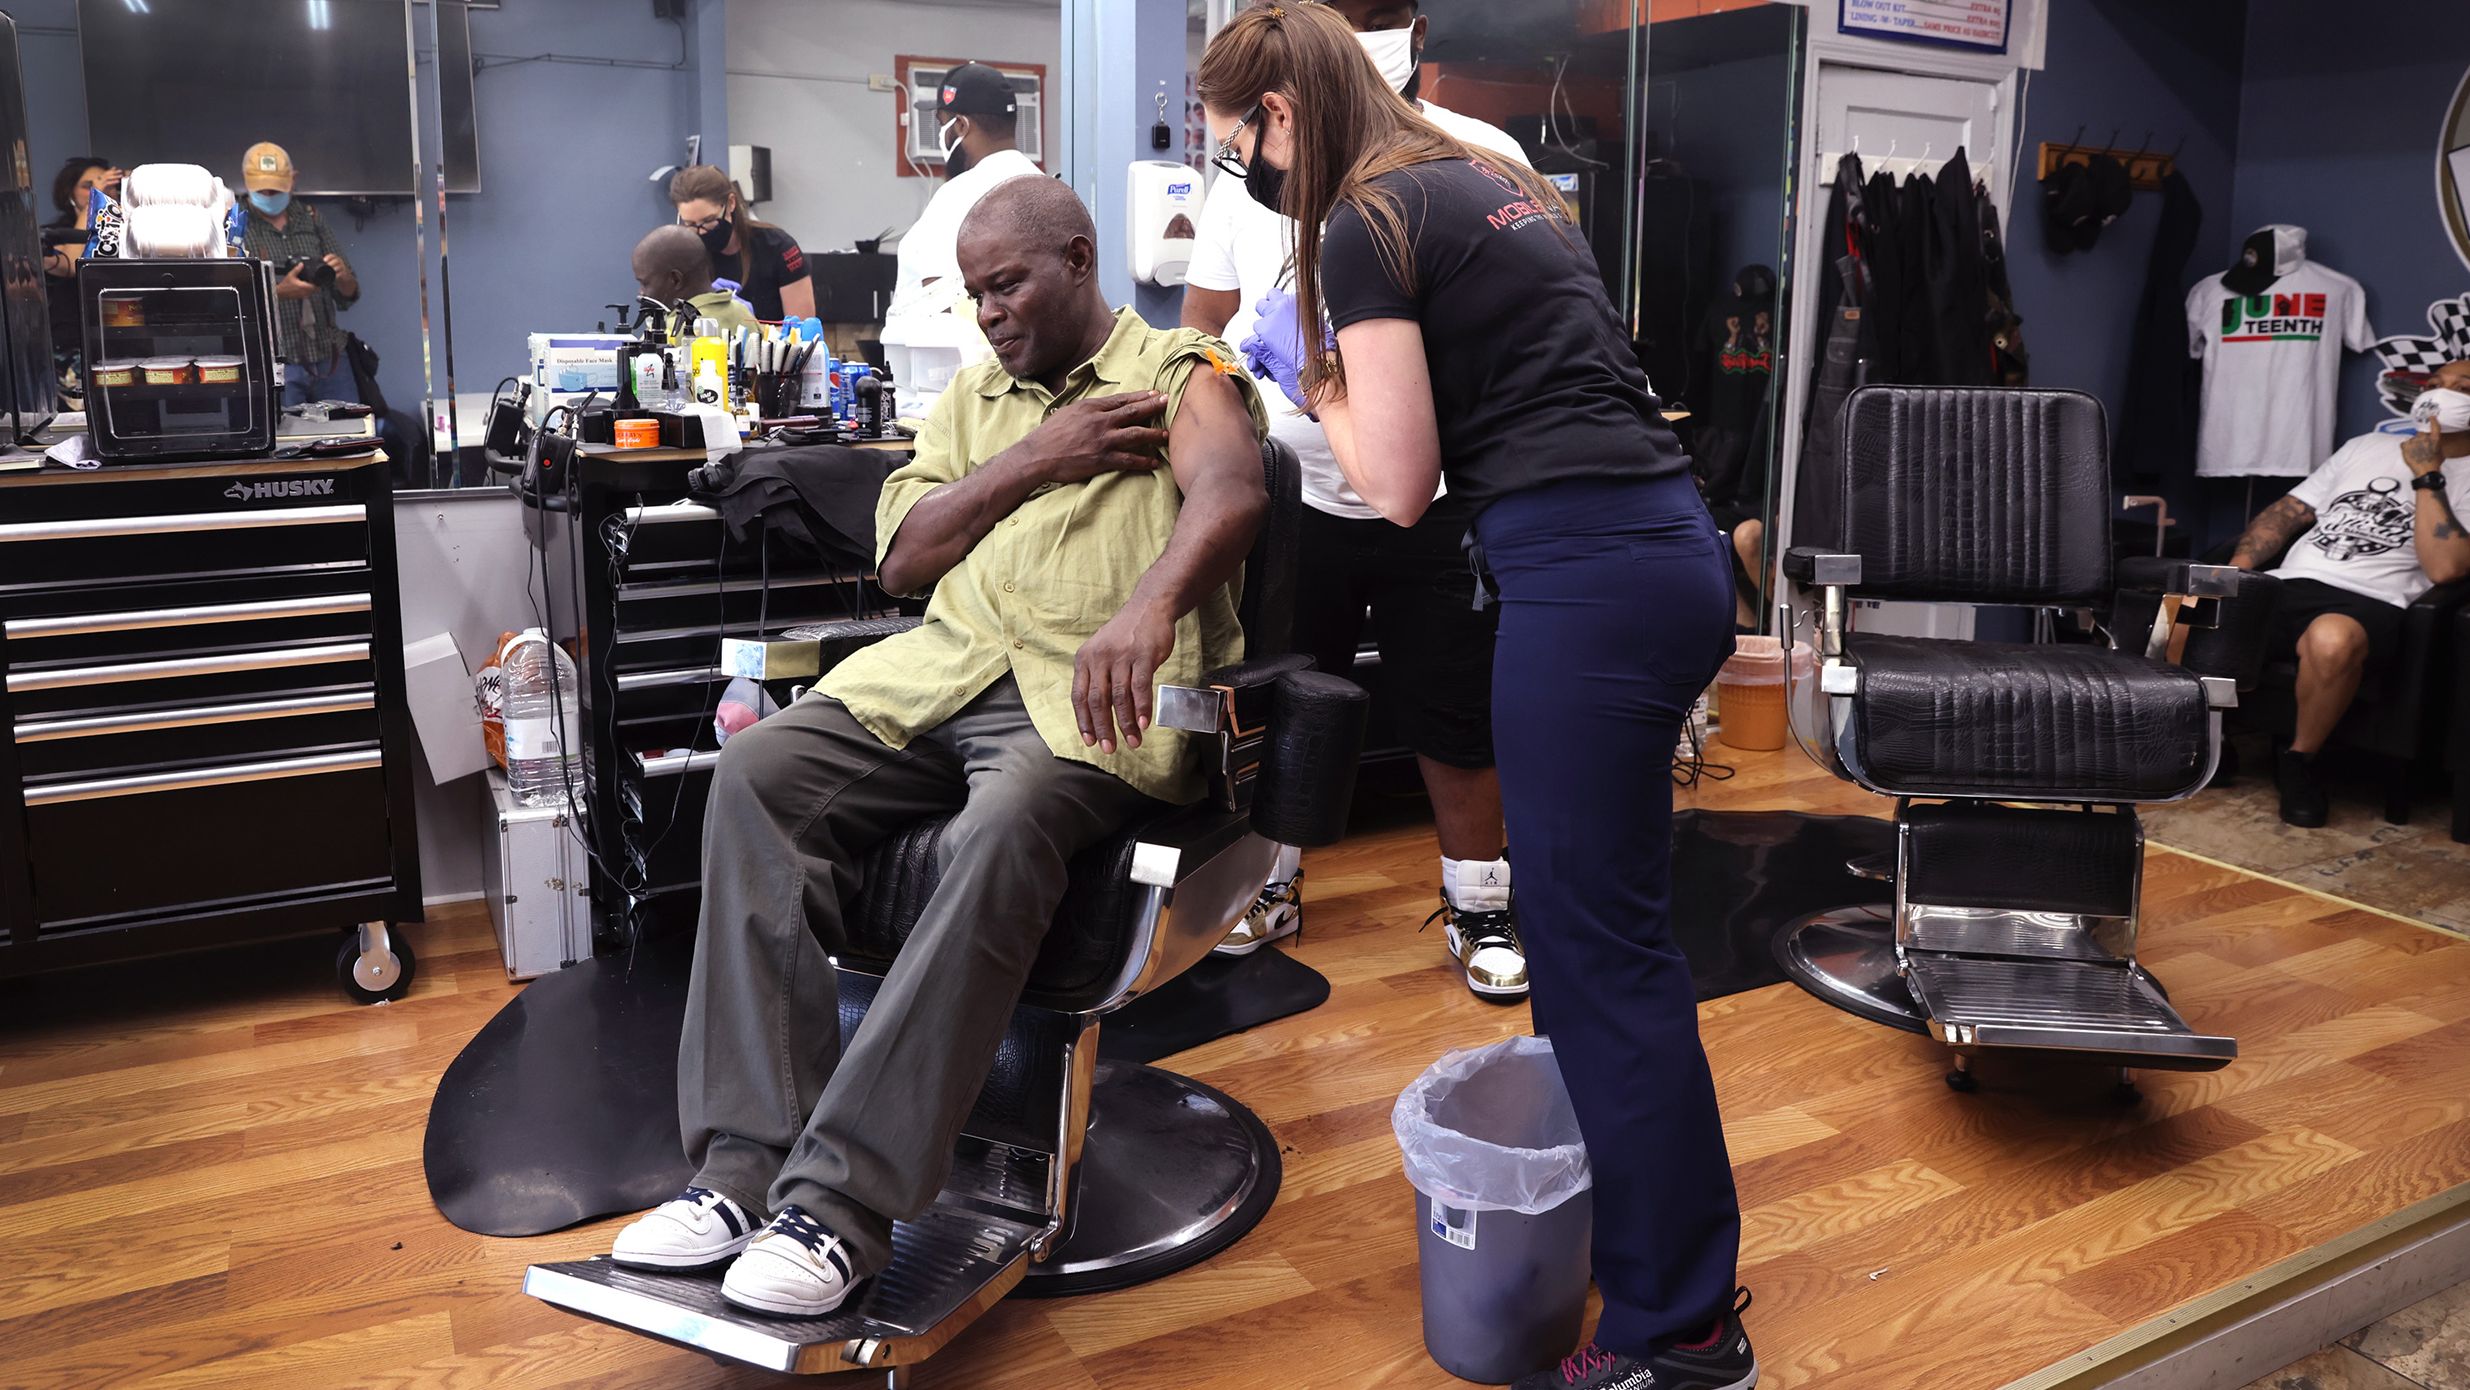 CHICAGO, ILLINOIS - JUNE 05: Eddie Stowe gets a COVID-19 vaccine from Amanda Kohler-Gopen at the It's Official Barbershop in the West Englewood neighborhood on June 05, 2021 in Chicago, Illinois.